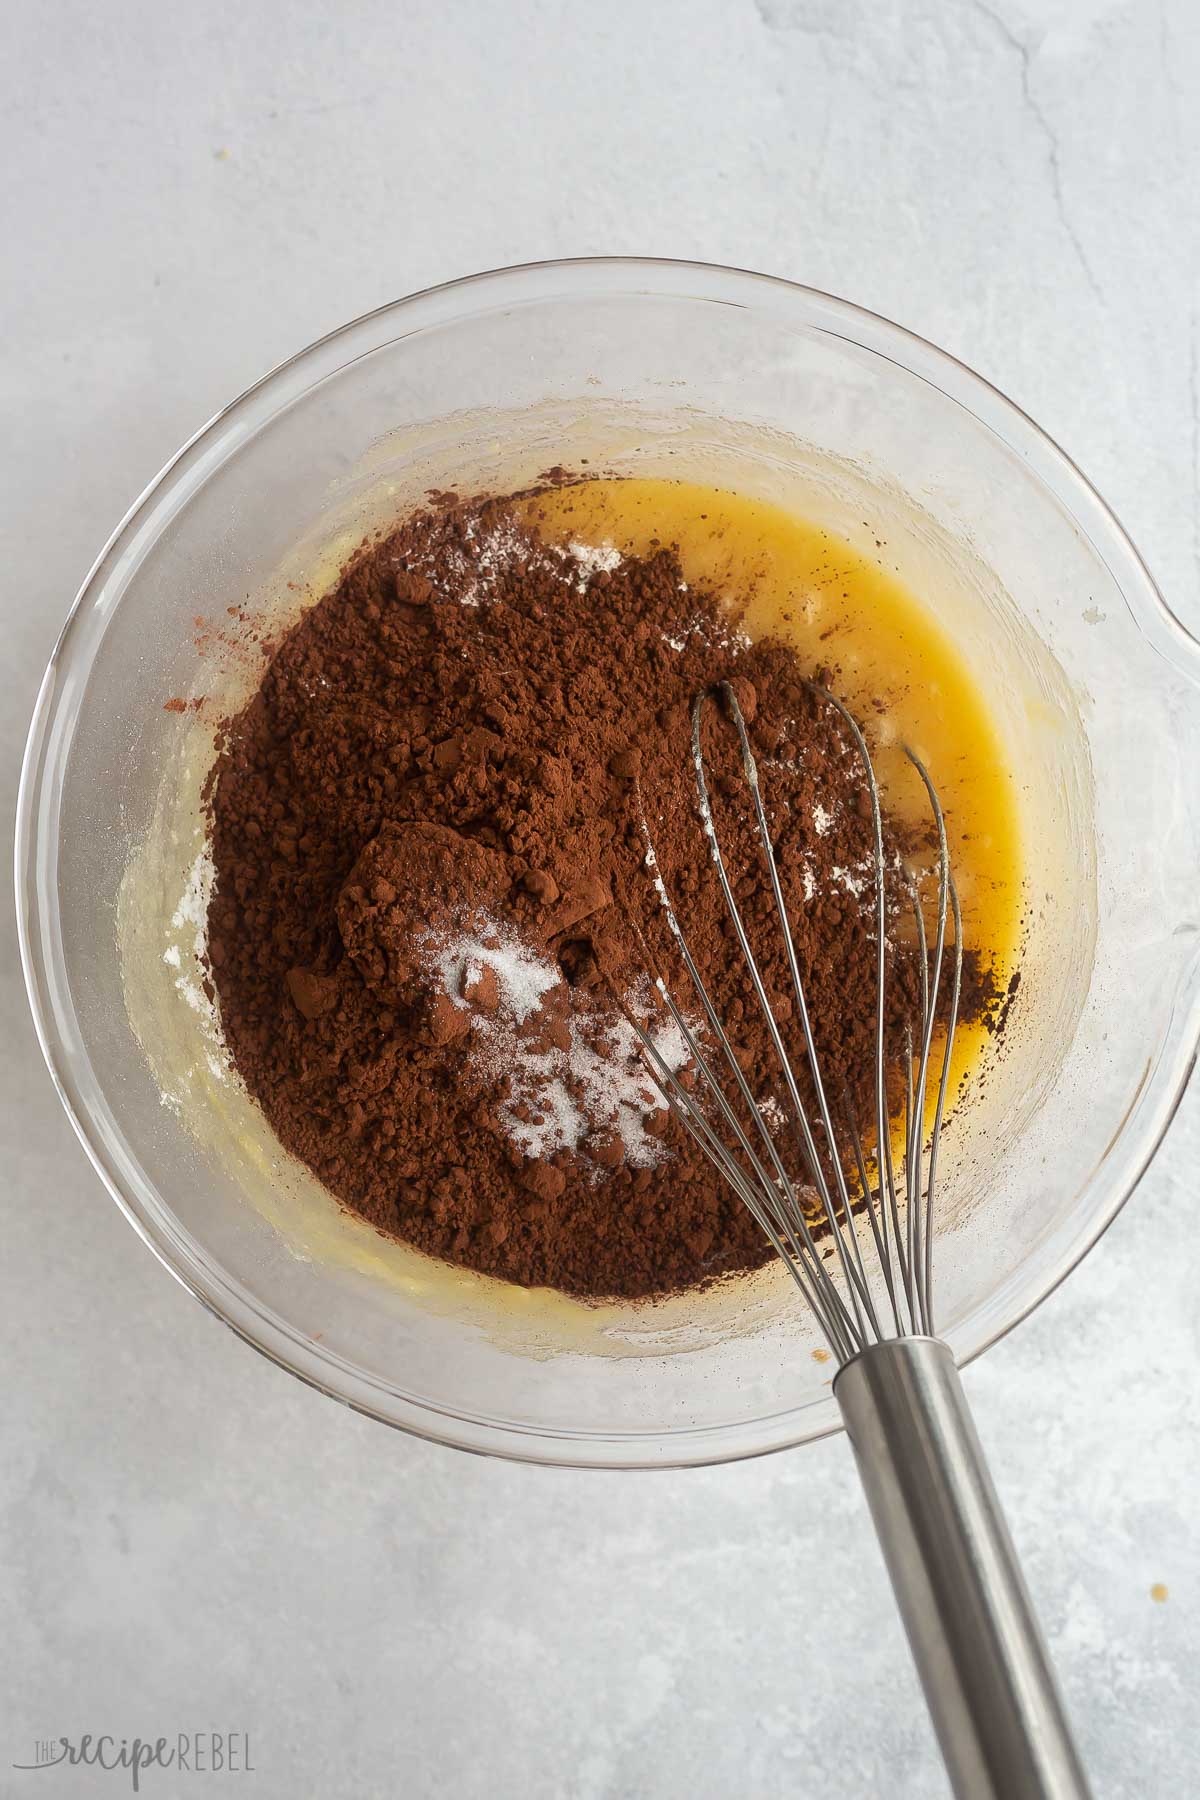 dry ingredients added to glass bowl to make brownie batter.